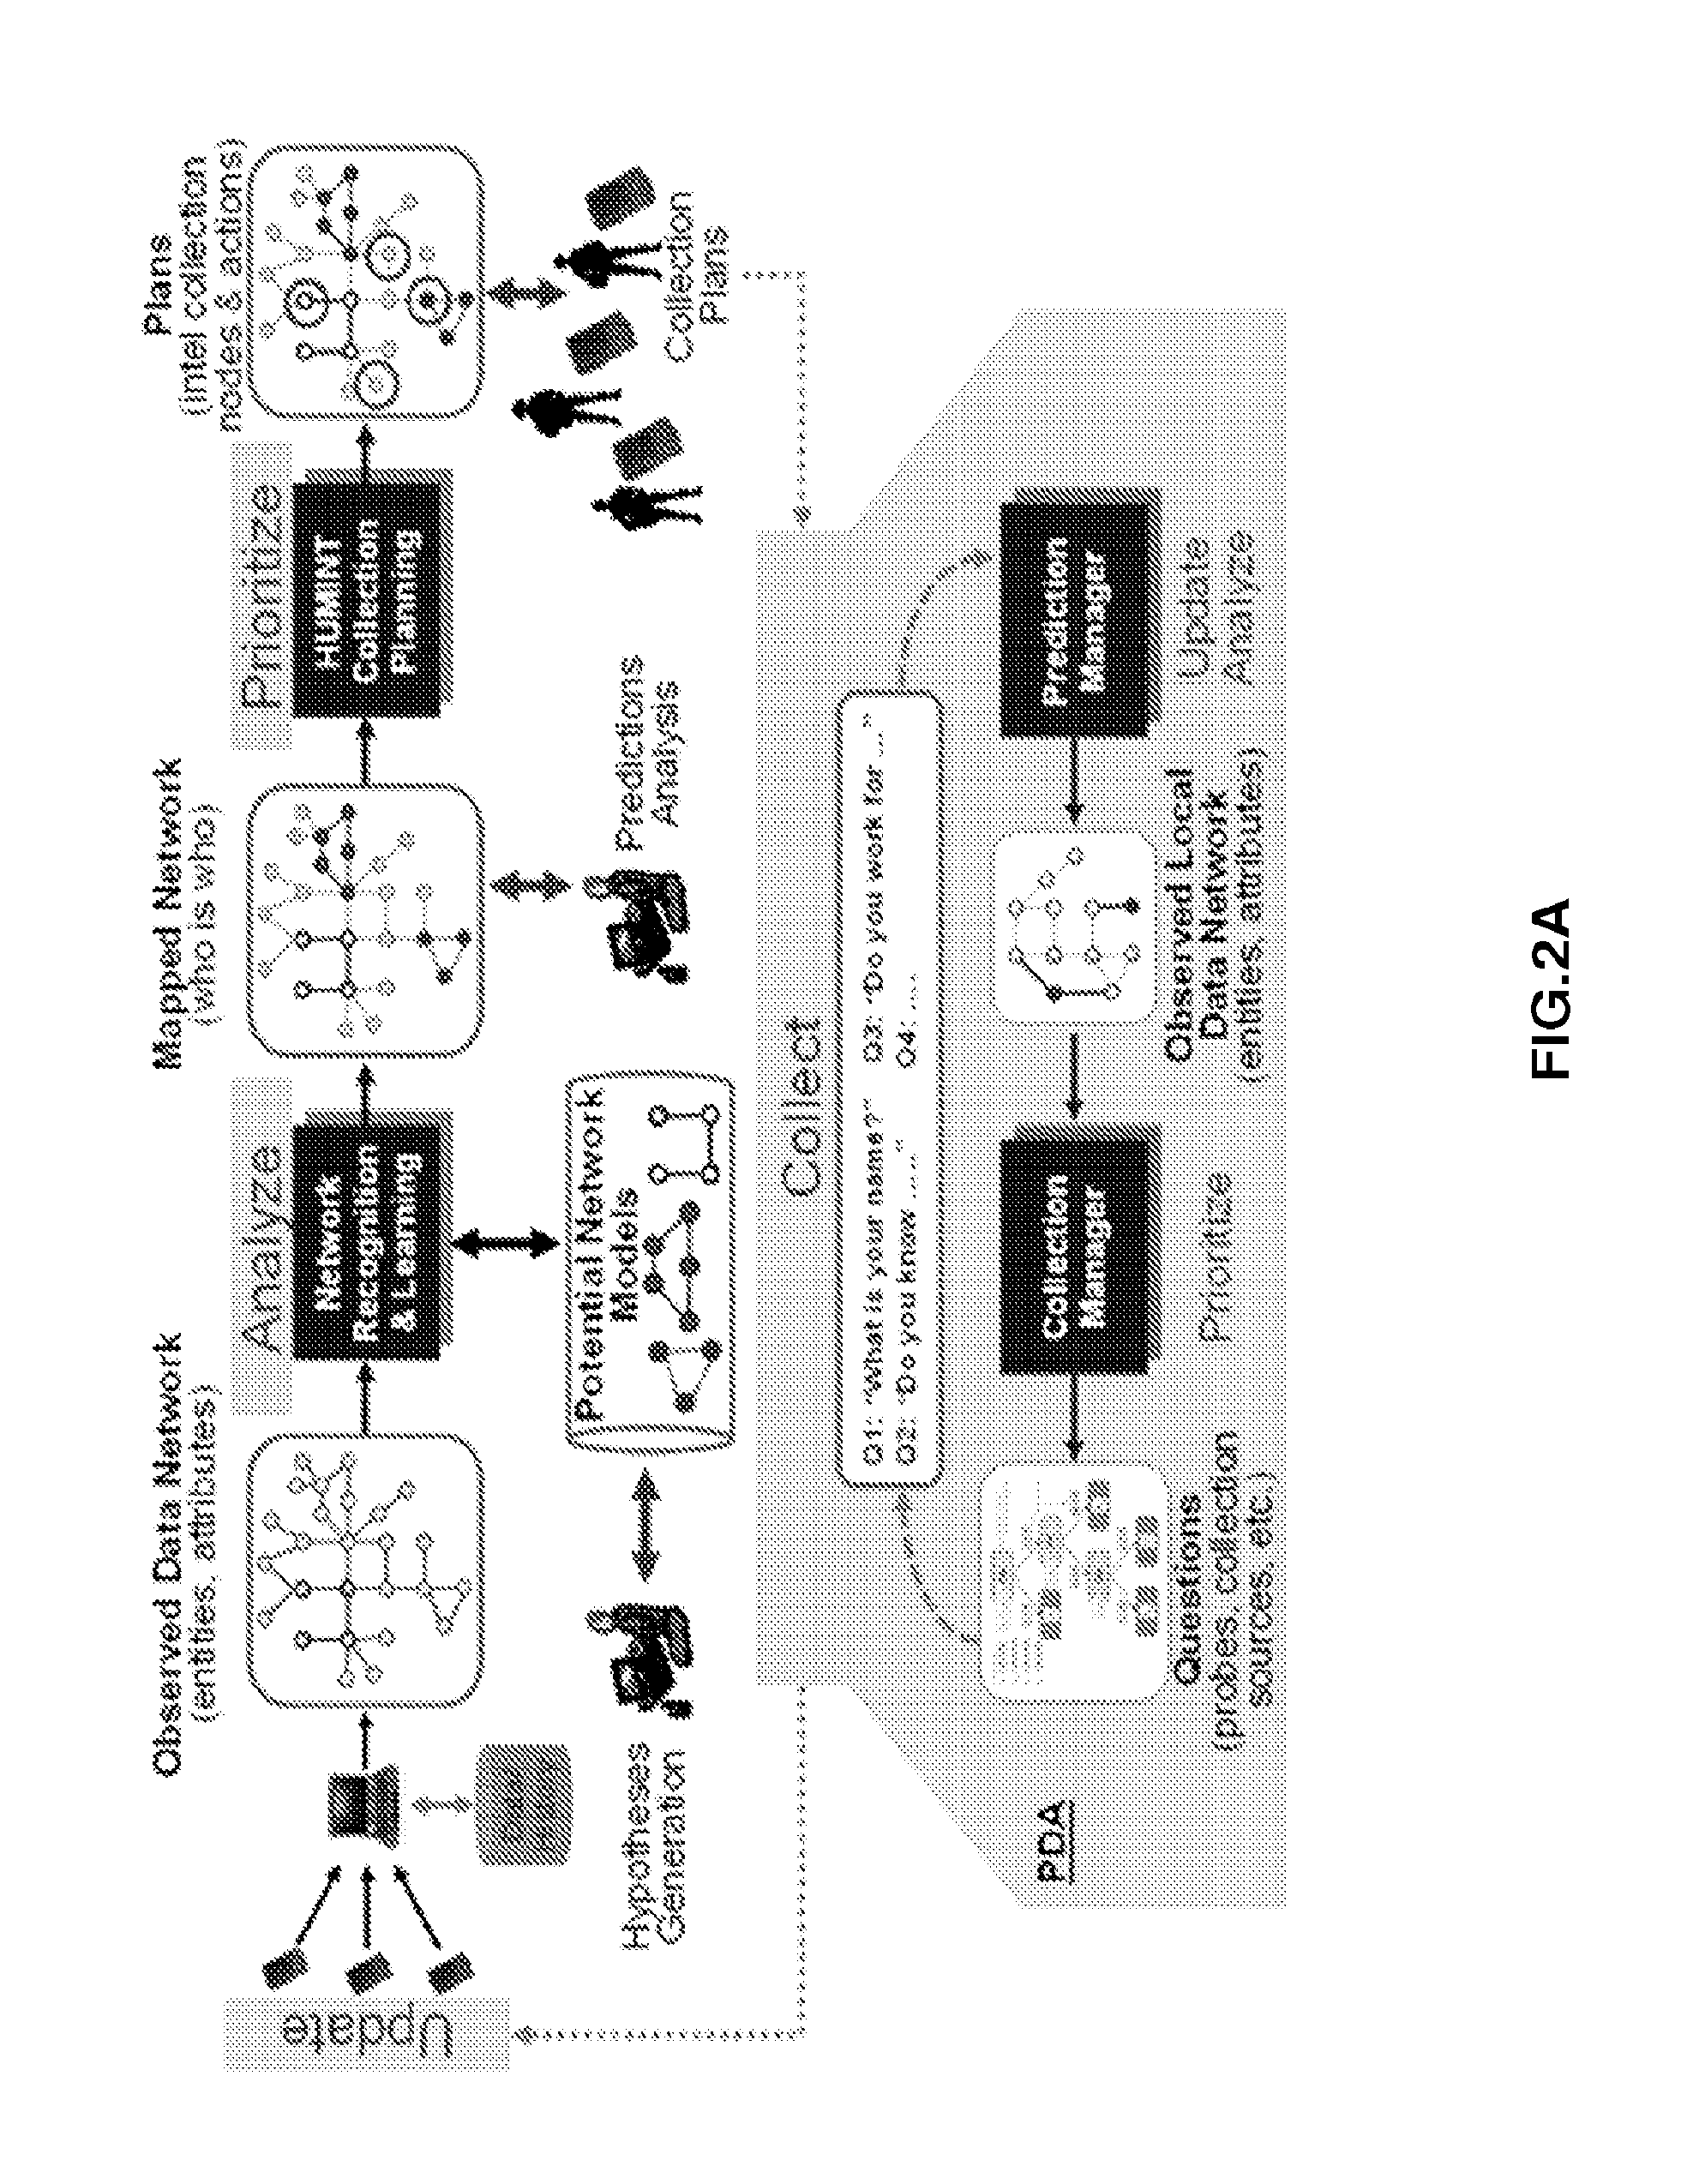 Systems and methods for network pattern matching